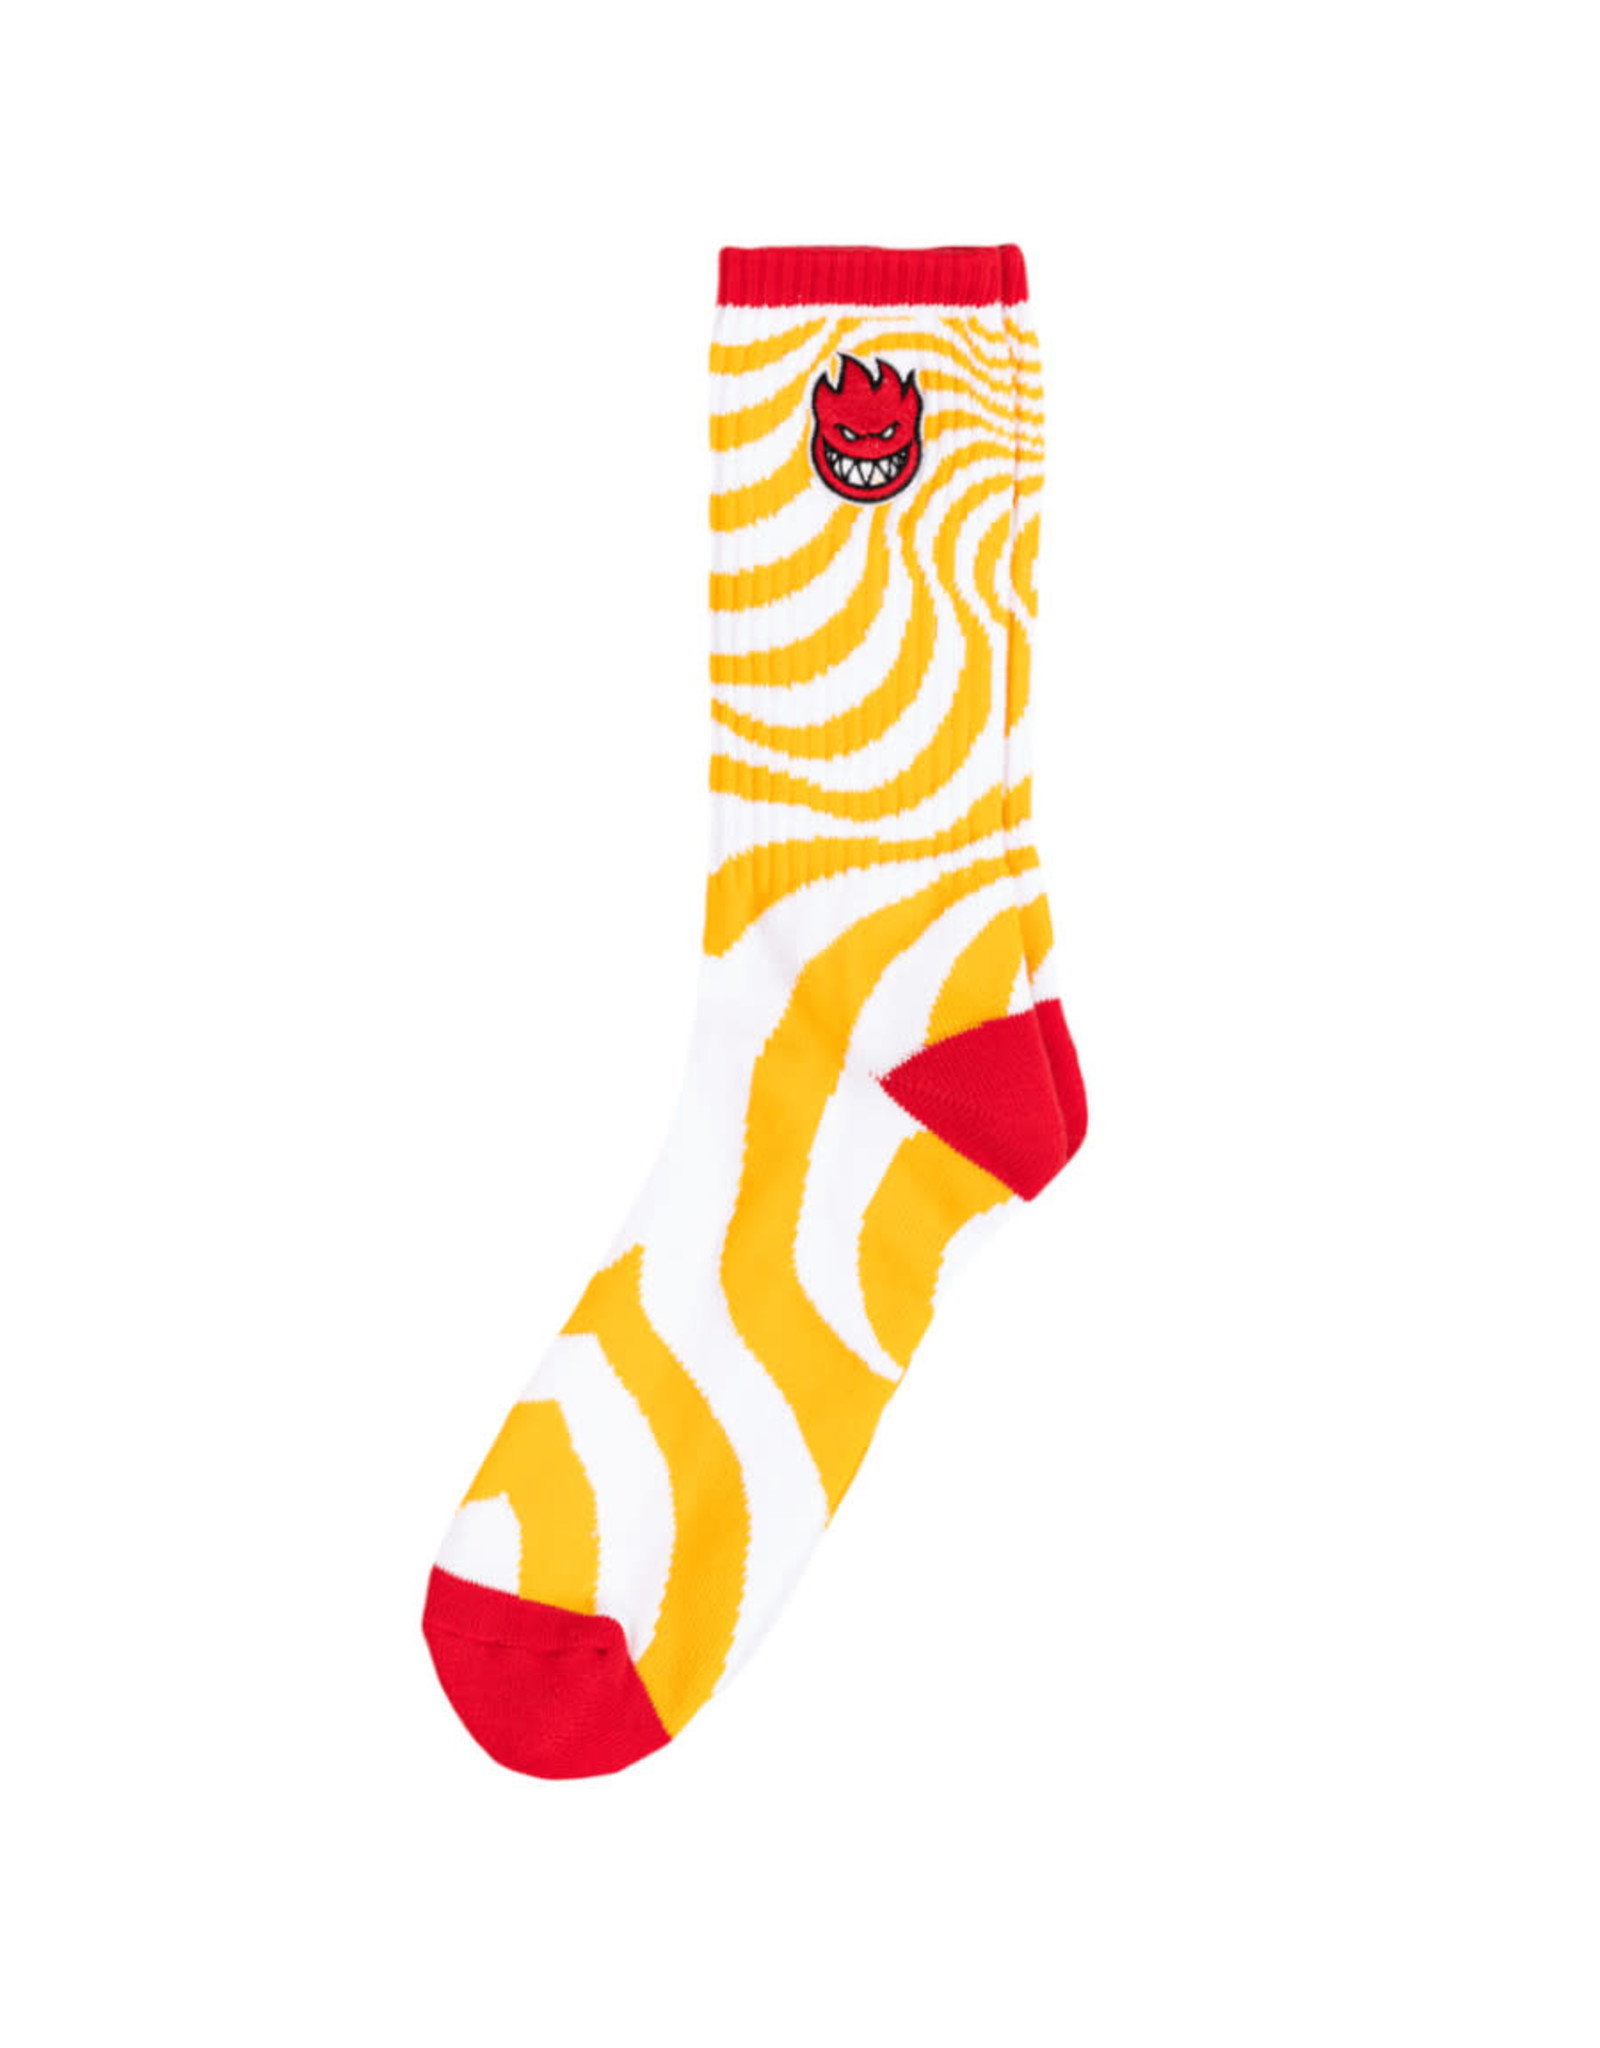 Spitfire Spitfire Socks Bighead Fill Embroidery Crew (White/Red/Gold)